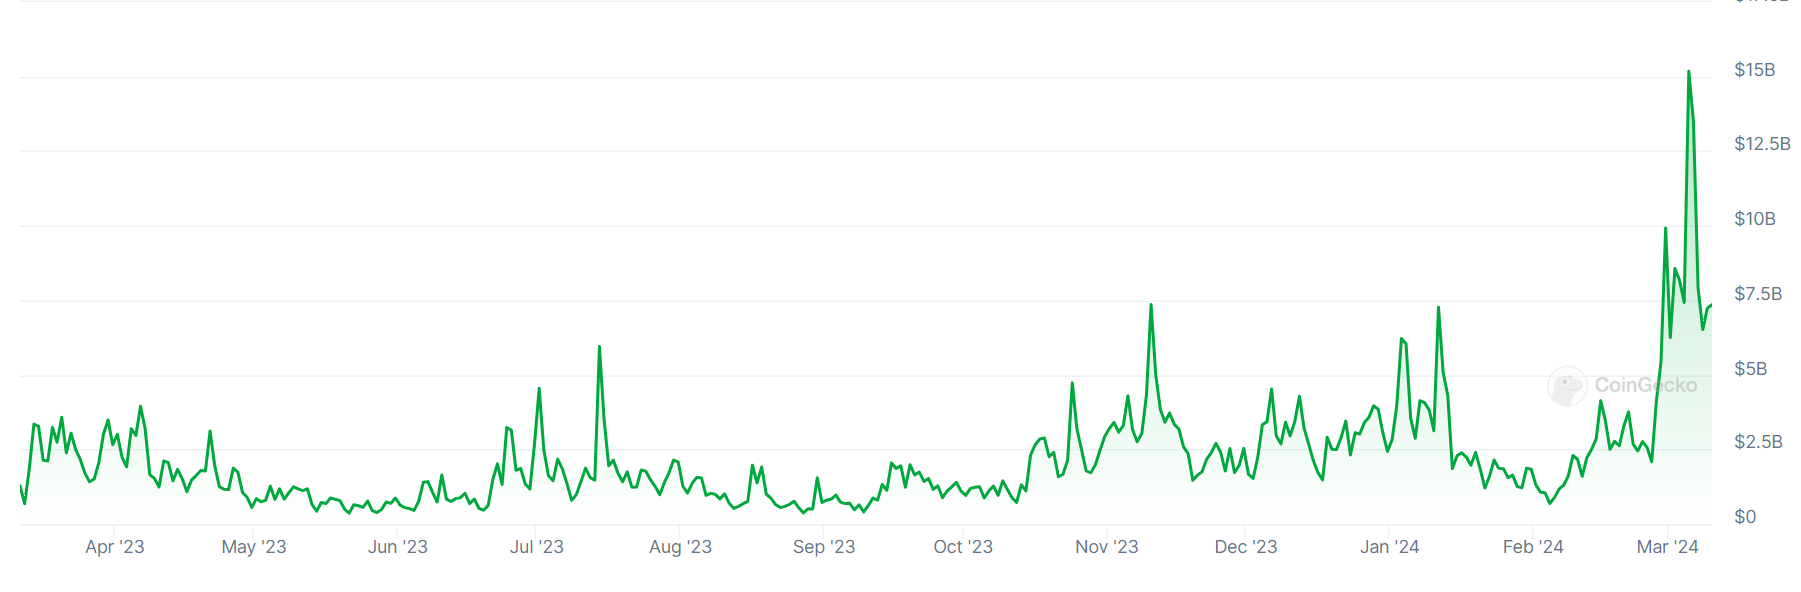 A graph showing trading volumes on the Upbit crypto exchange.